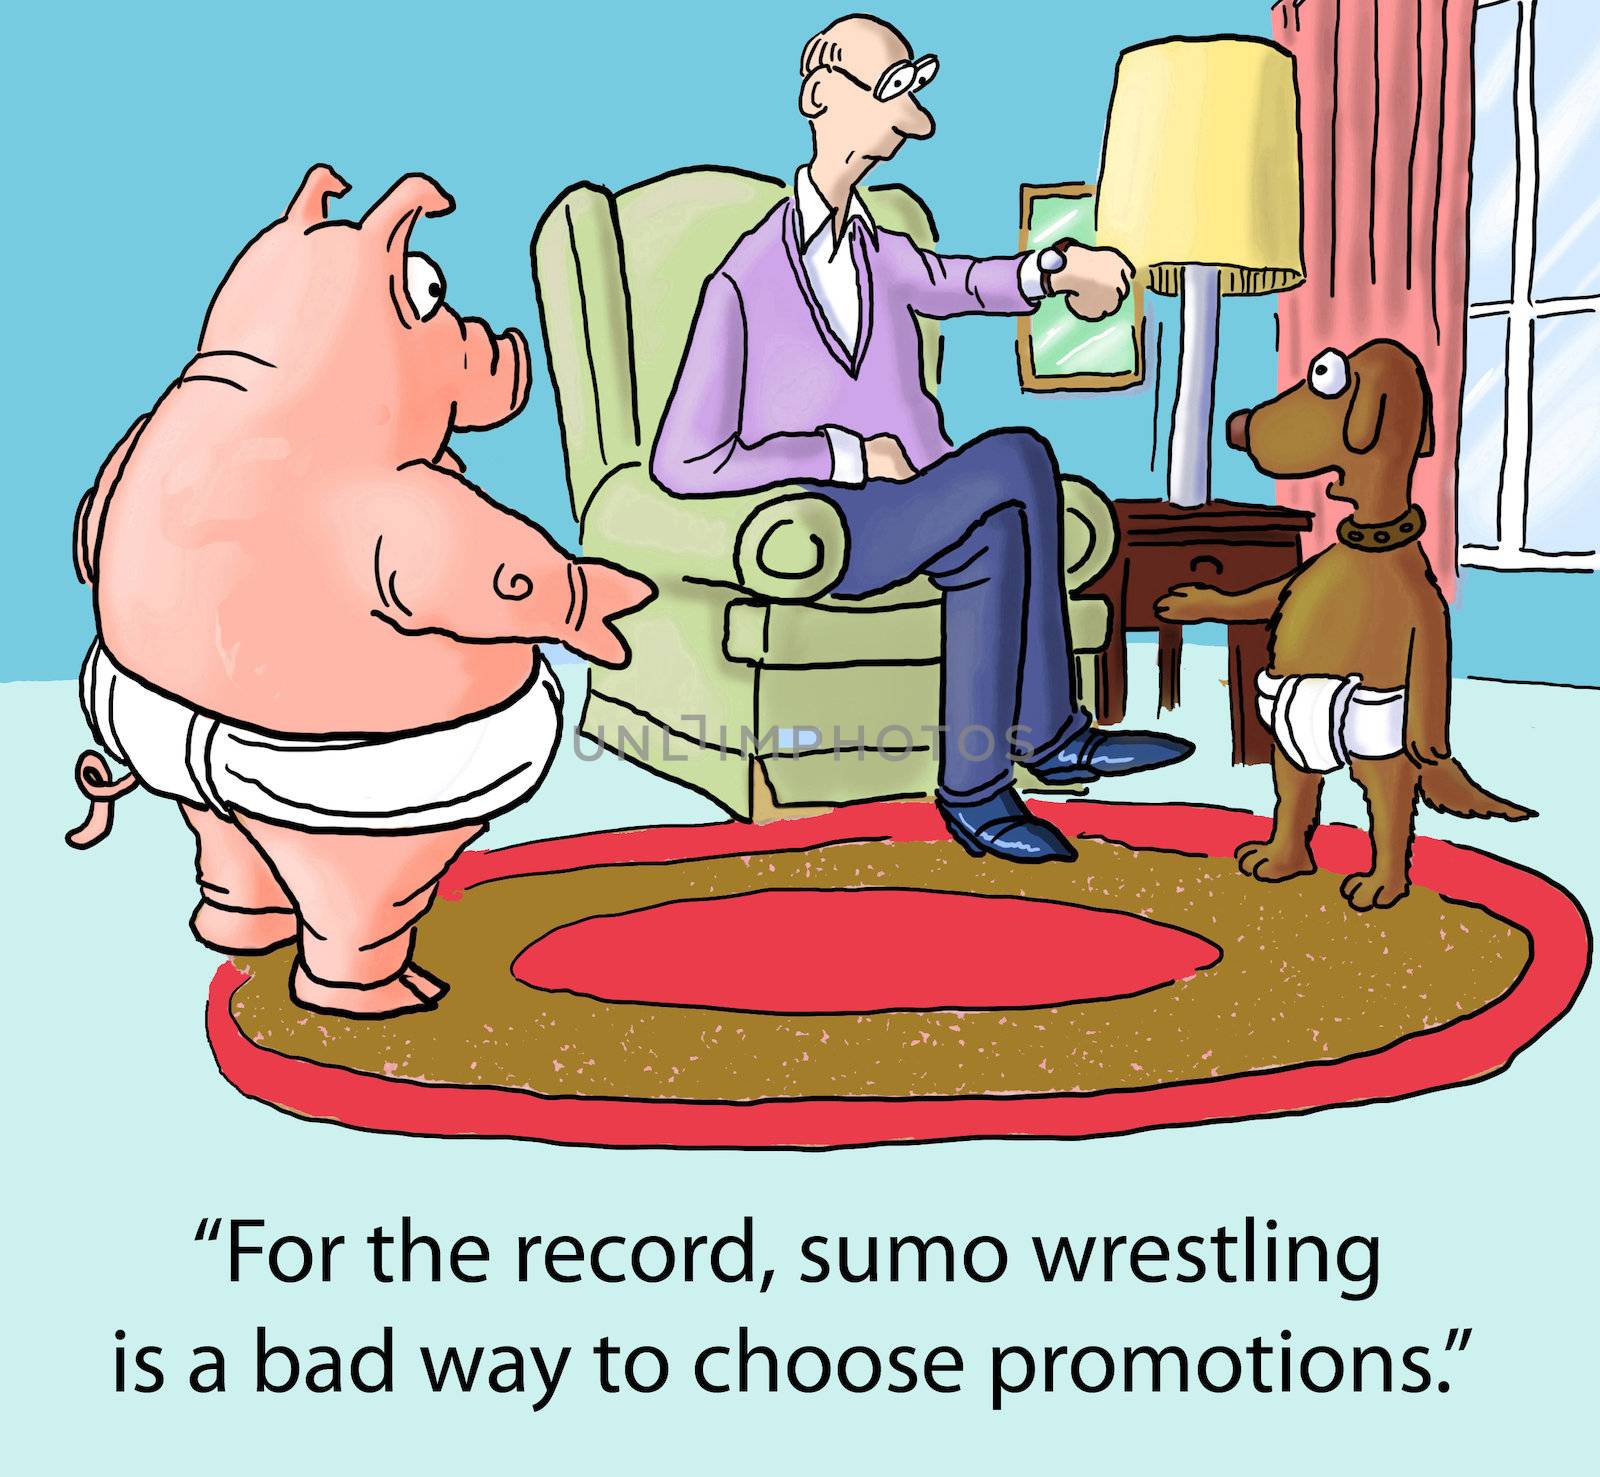 "For the record, Sumo wrestling is a bad way to choose promotions."